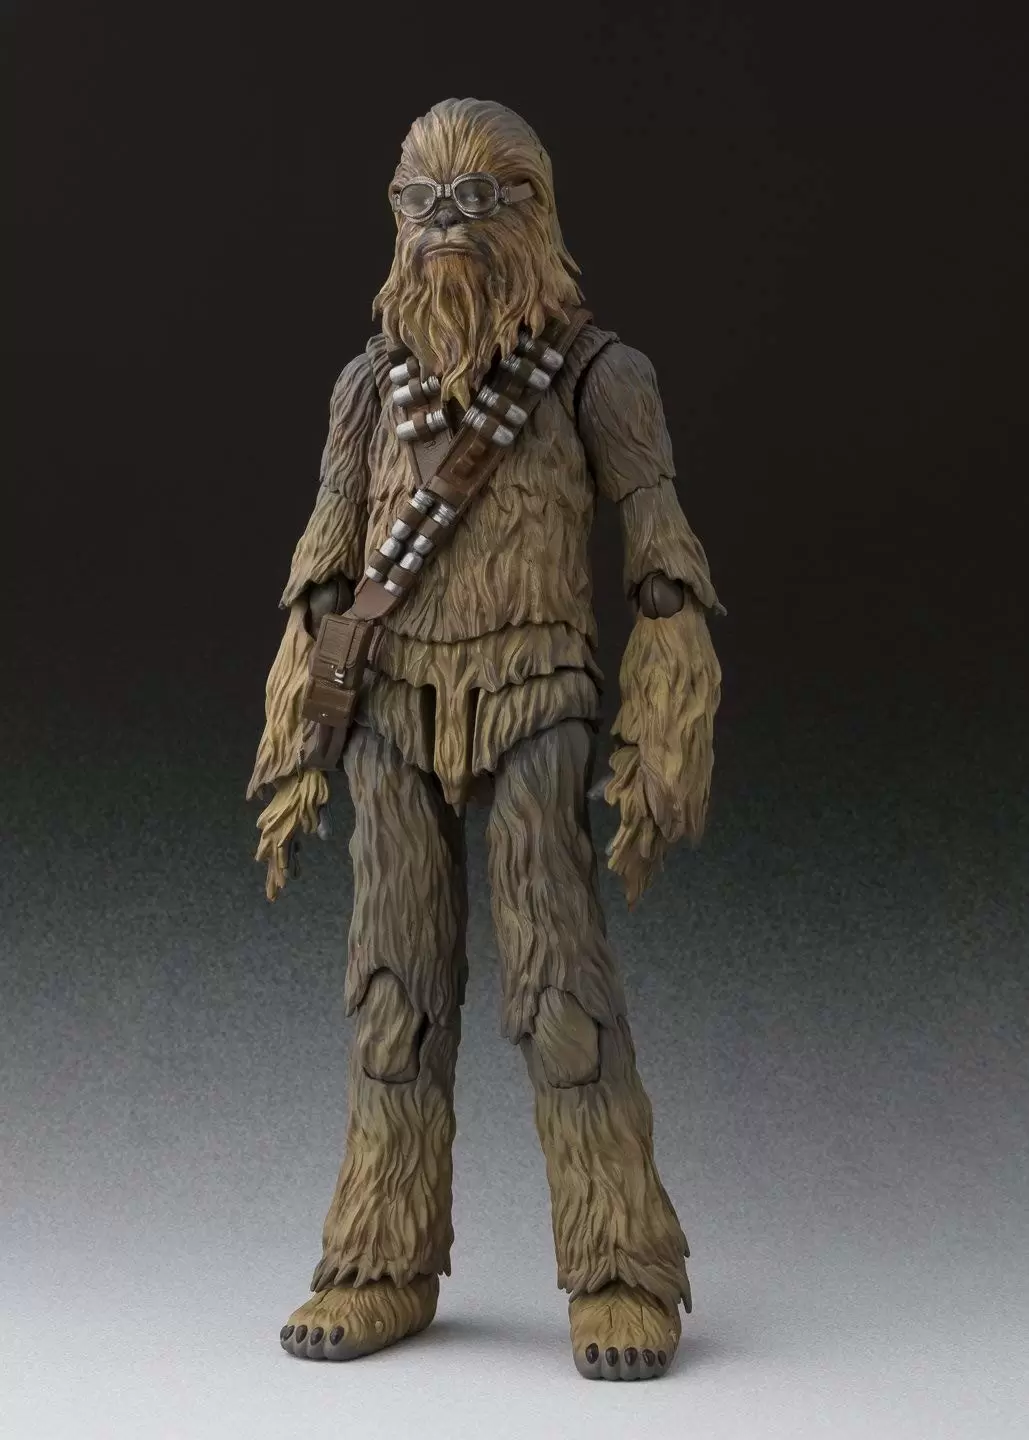 S.H. Figuarts Star Wars - Solo A Star Wars Story - Chewbacca